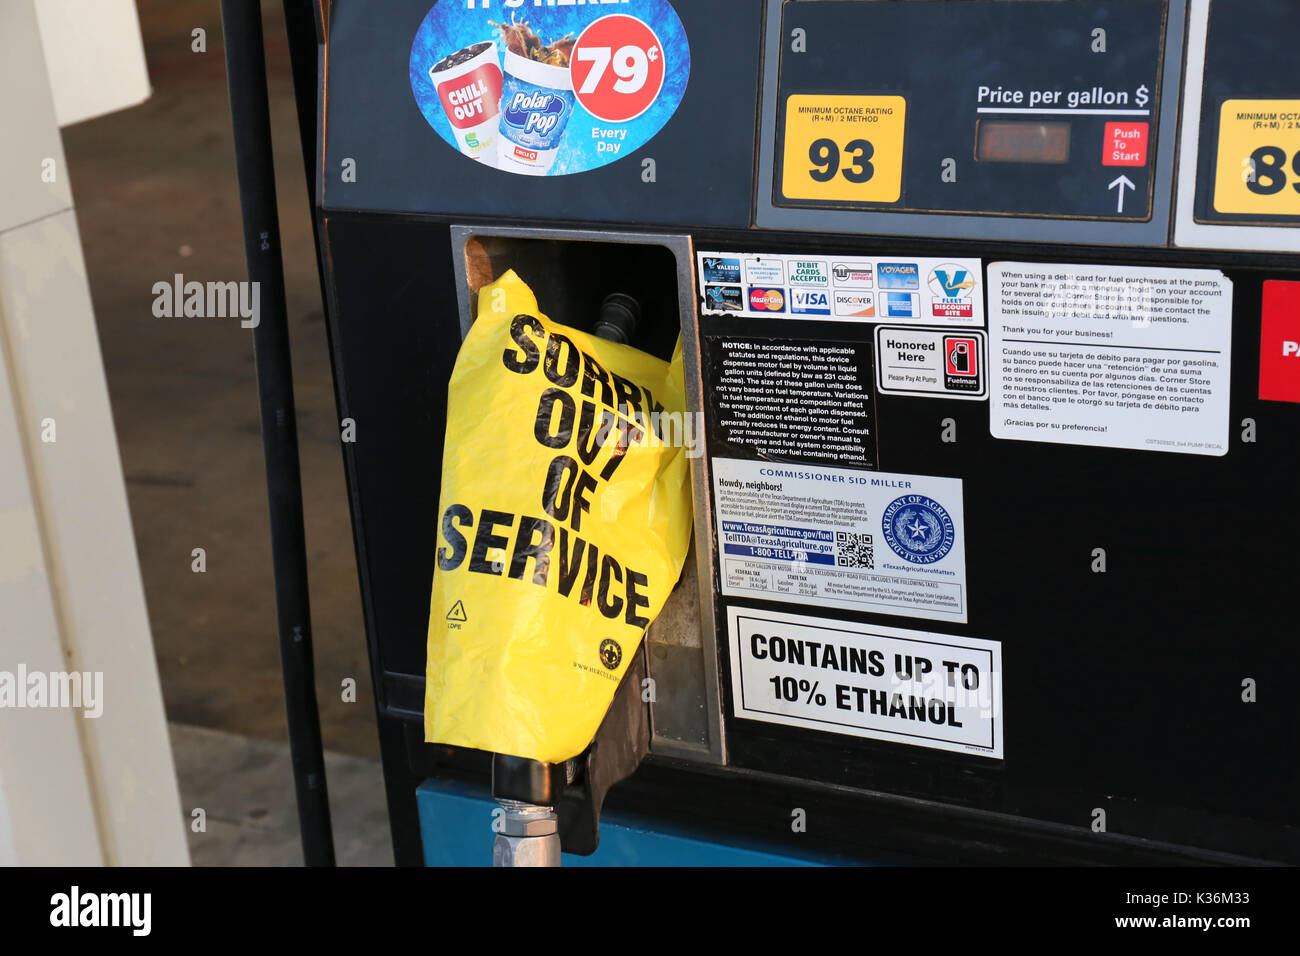 San Antonio, USA. 1st Sep, 2017. A 'Sorry, out of service' sign is seen at a gas station in San Antonio, Texas, the United States, Sept. 1, 2017. Gasoline prices in the U.S. have risen to a new high amid continuing fear of shortage in Texas and other states after Hurricane Harvey's strike. Credit: Yan Bo/Xinhua/Alamy Live News Stock Photo